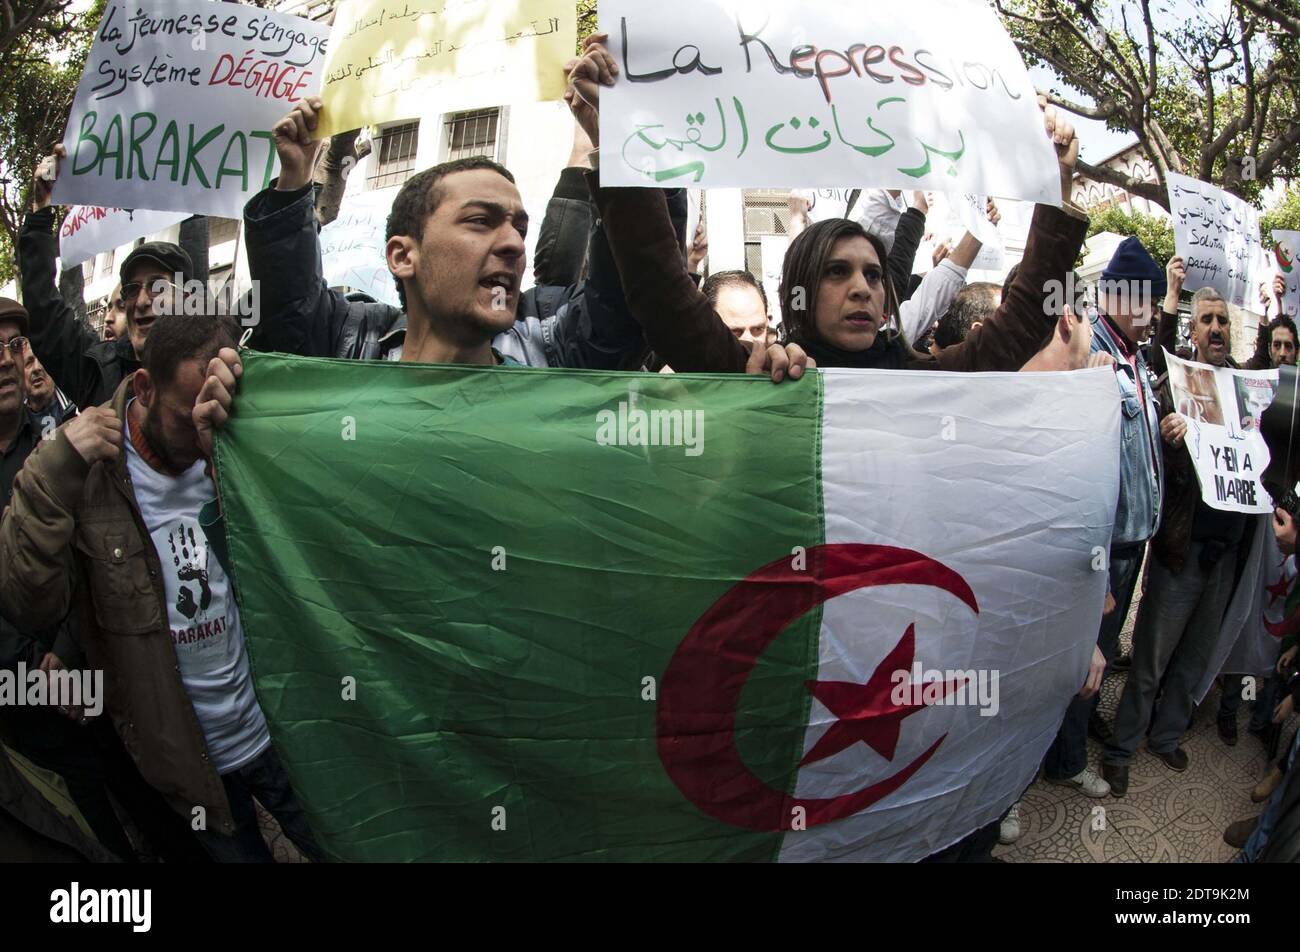 Algerian supporters of a movement called Barakat (meaning in Arabic ‘That's enough’), campaigning for new leadership in Algeria, demonstrate holding banners and shouting slogans against Algeria's current President Bouteflika Abdelaziz running for a fourth term in the April 17 elections, outside the central school in downtown Algiers on March 27, 2014. The 77-year-old leader's decision to seek re-election despite serious health problems, which confined him to hospital in Paris for three months last year, has drawn heavy criticism not only in opposition ranks but also from some within the regime Stock Photo